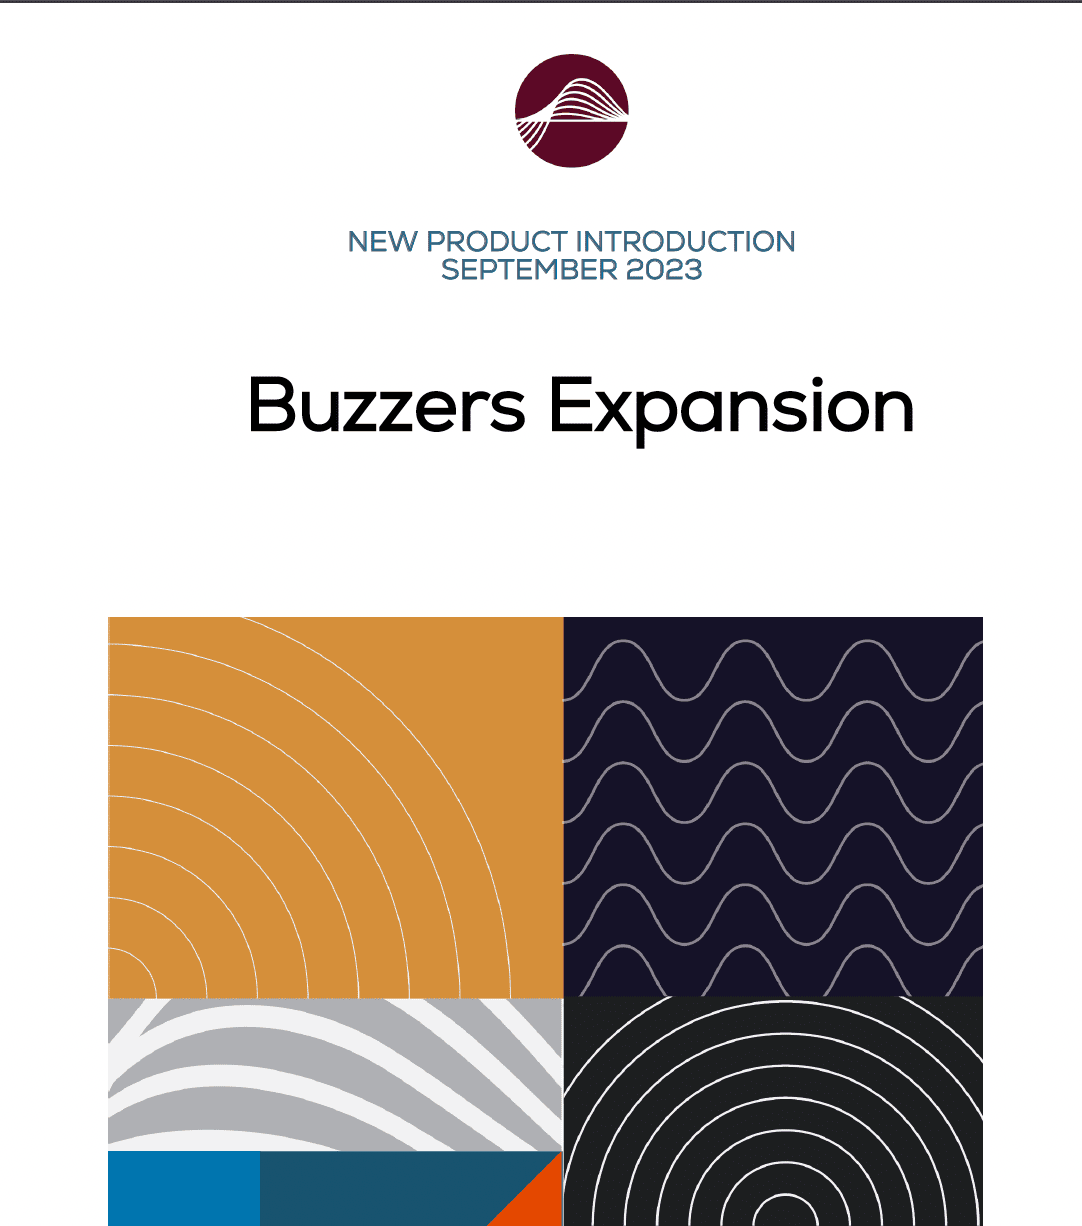 Buzzers Expansion